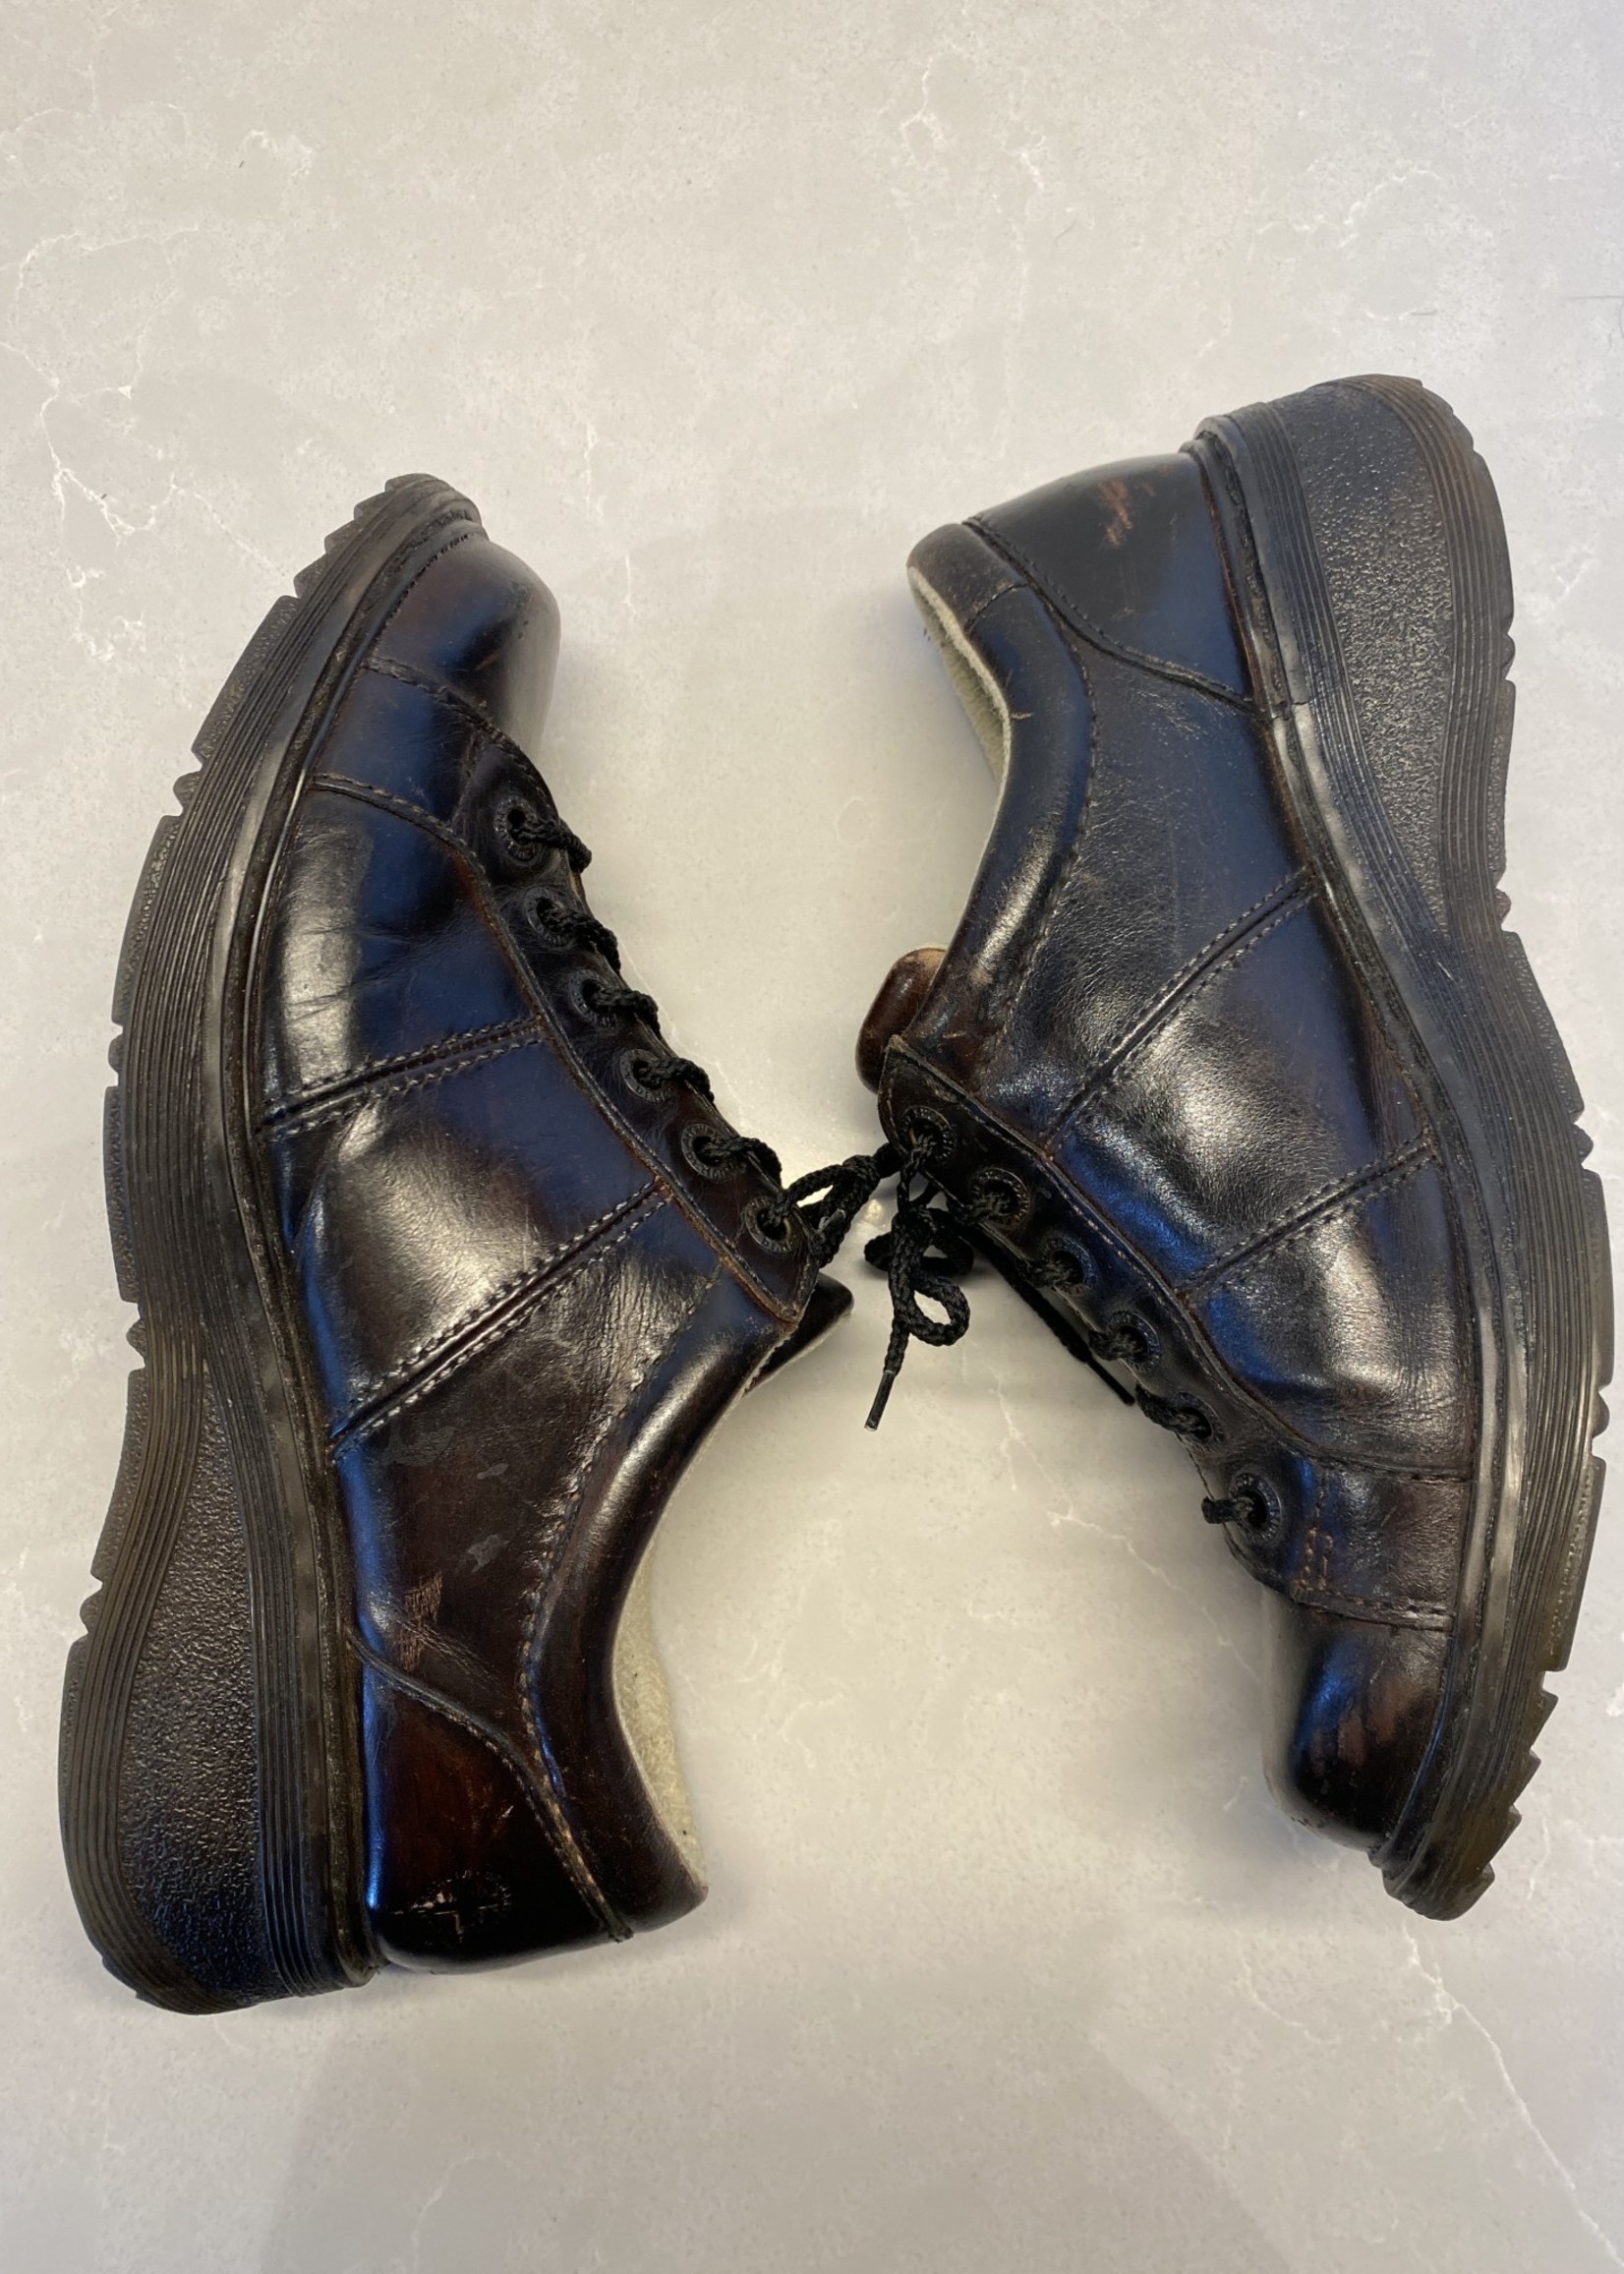 Dr Martens Dark Brown Leather Shoes 9